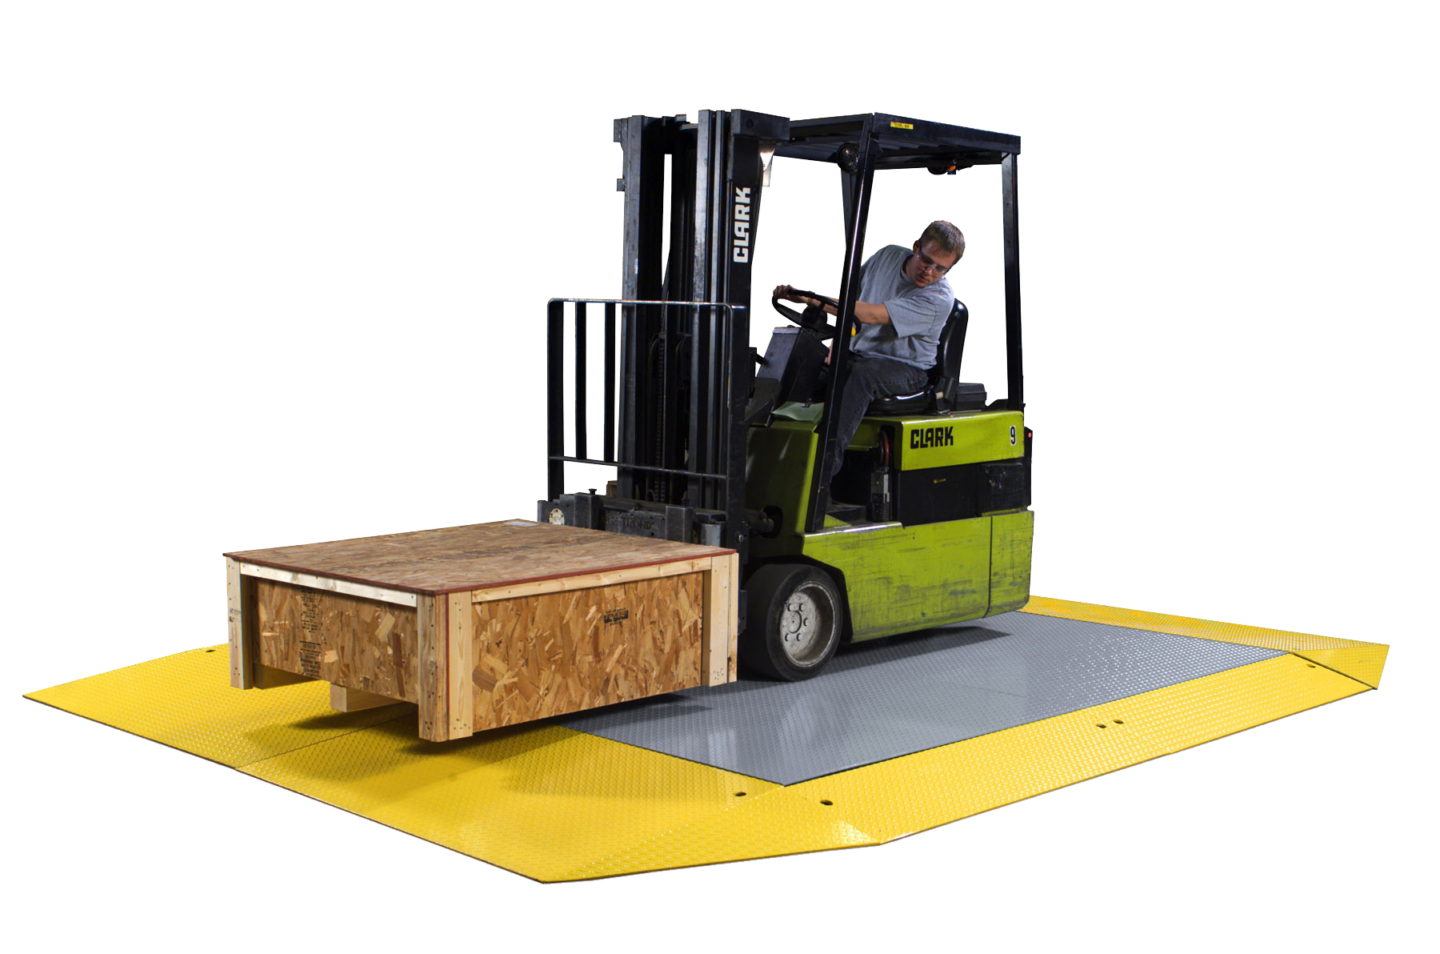 https://www.averyweigh-tronix.com/wp-content/uploads/2021/10/Pancake-Cargo-Scale_Forklift-1440x954.png